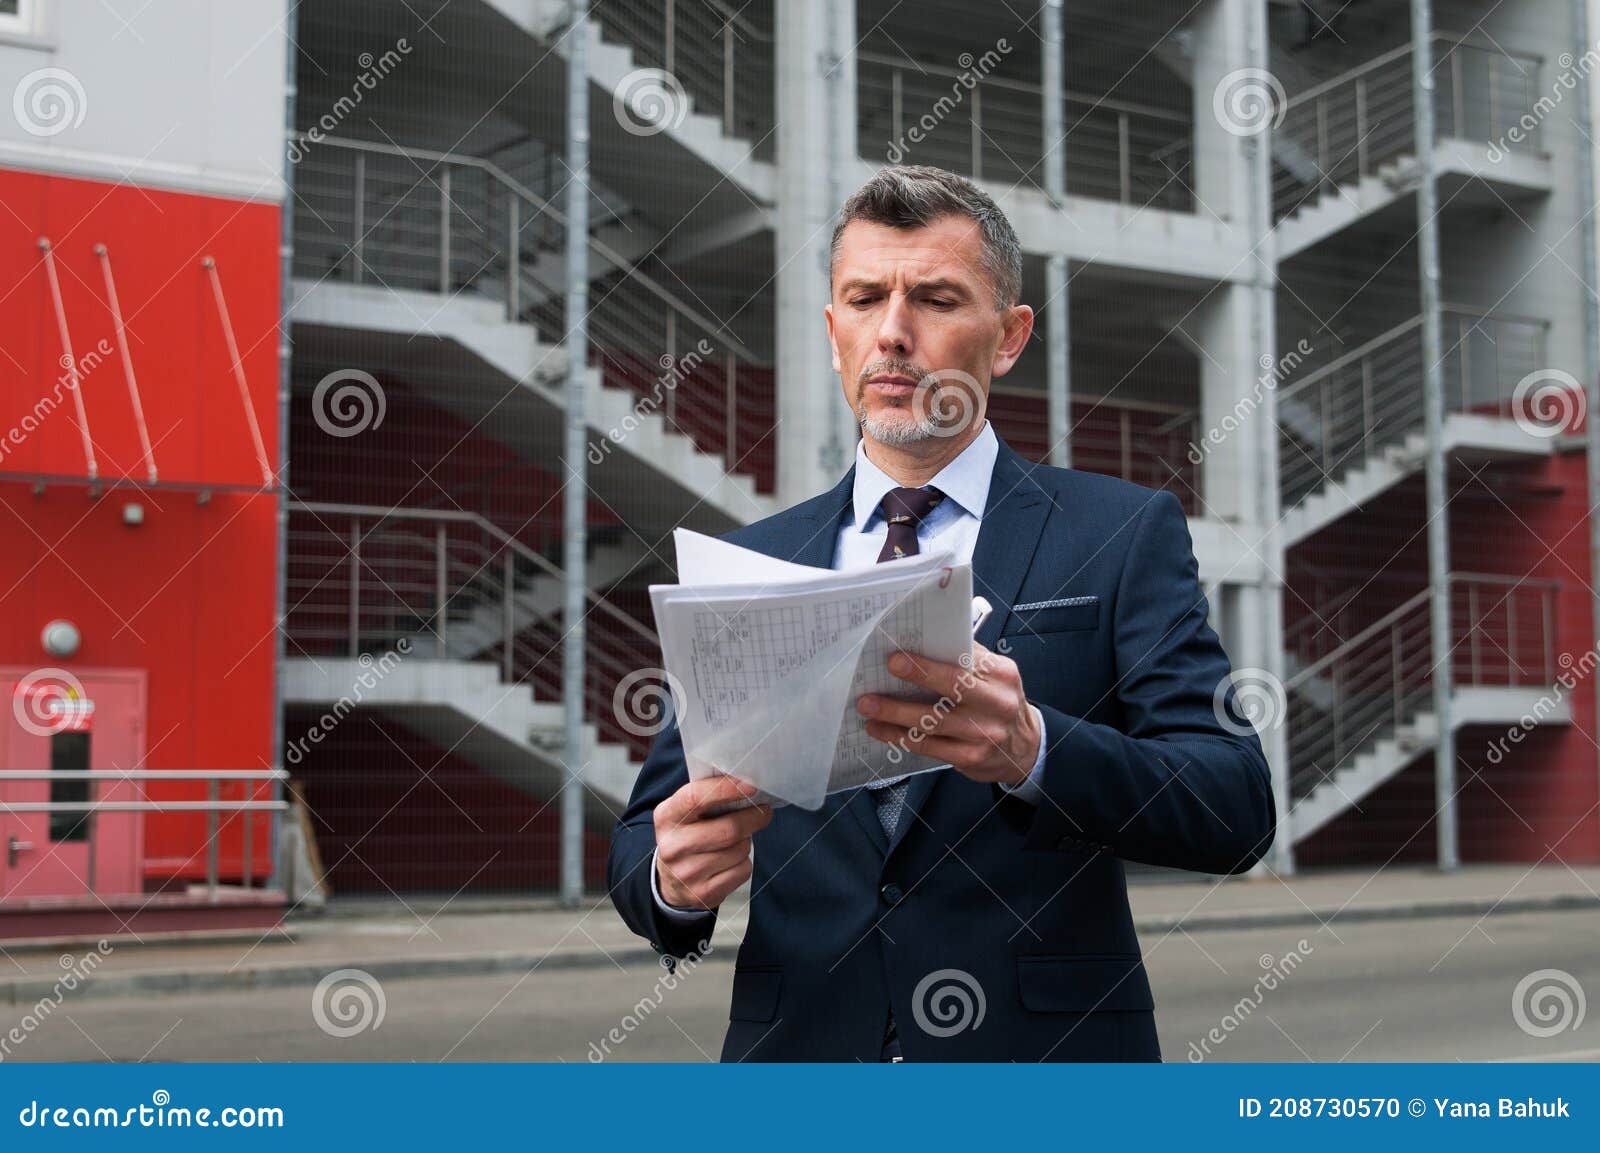 mid adult businessman writing on clipboard in metal industry